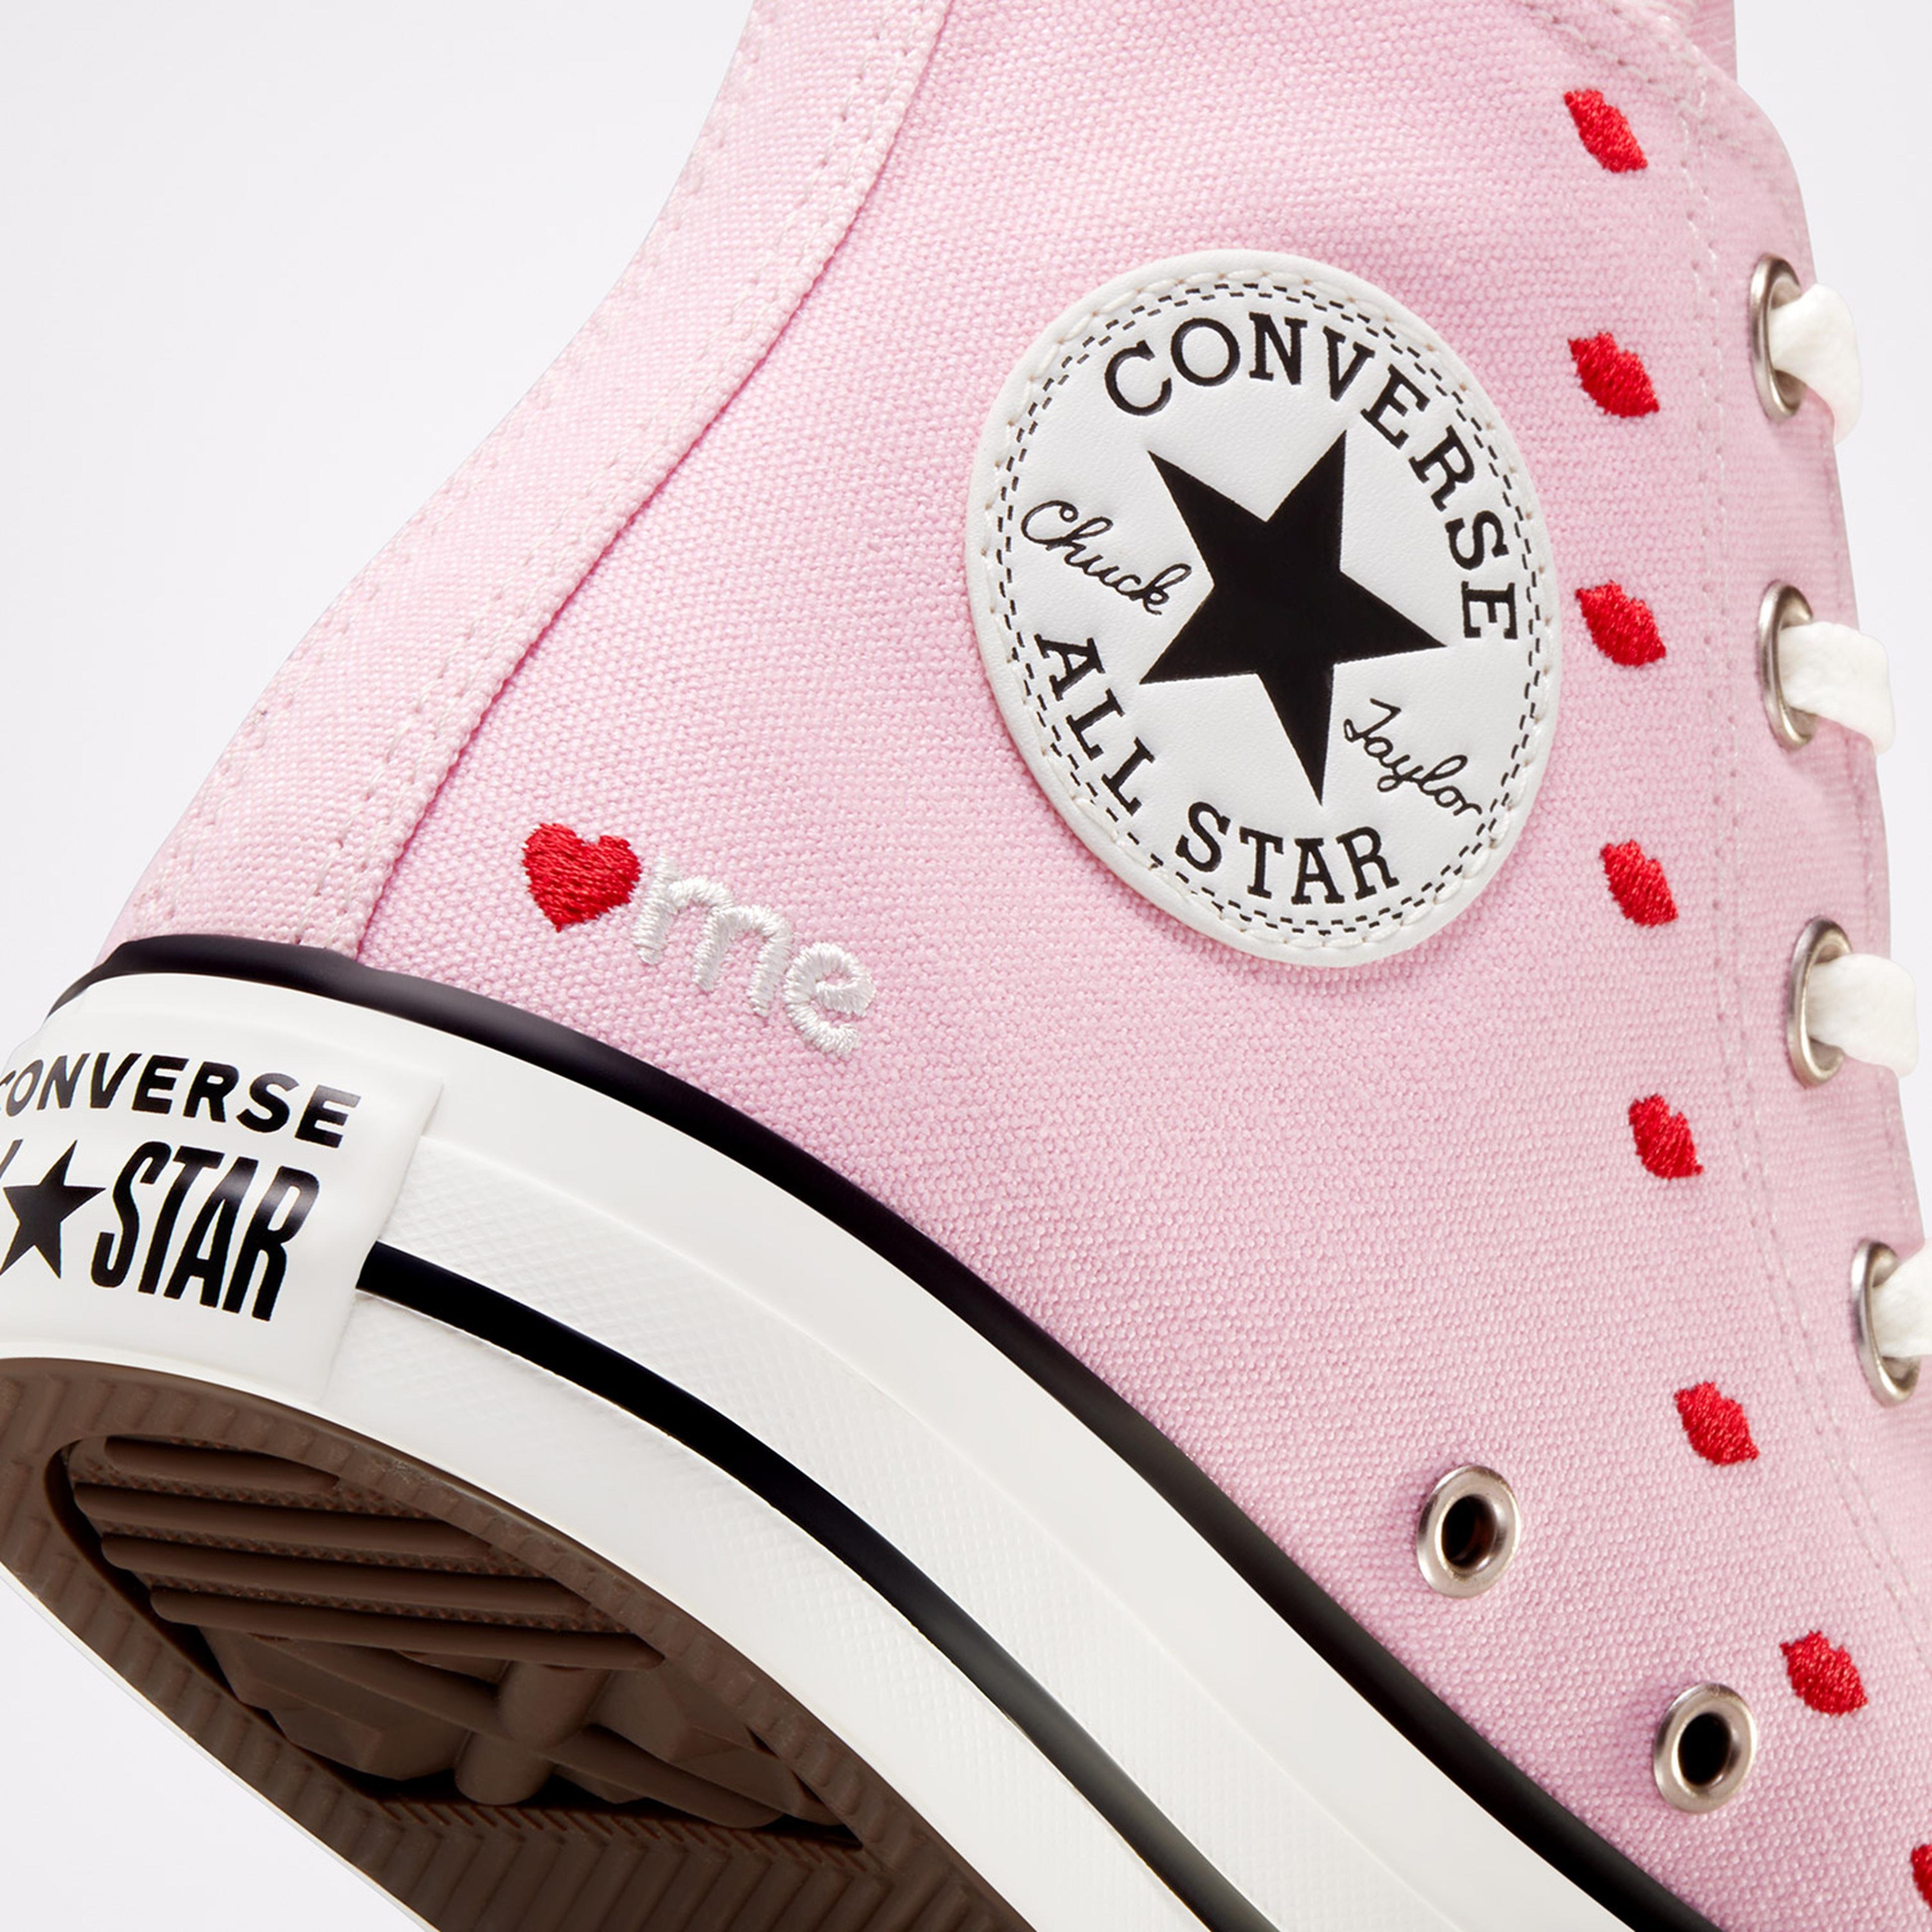 Converse Crafted With Love Chuck Taylor All Star Kadın Pembe Sneaker